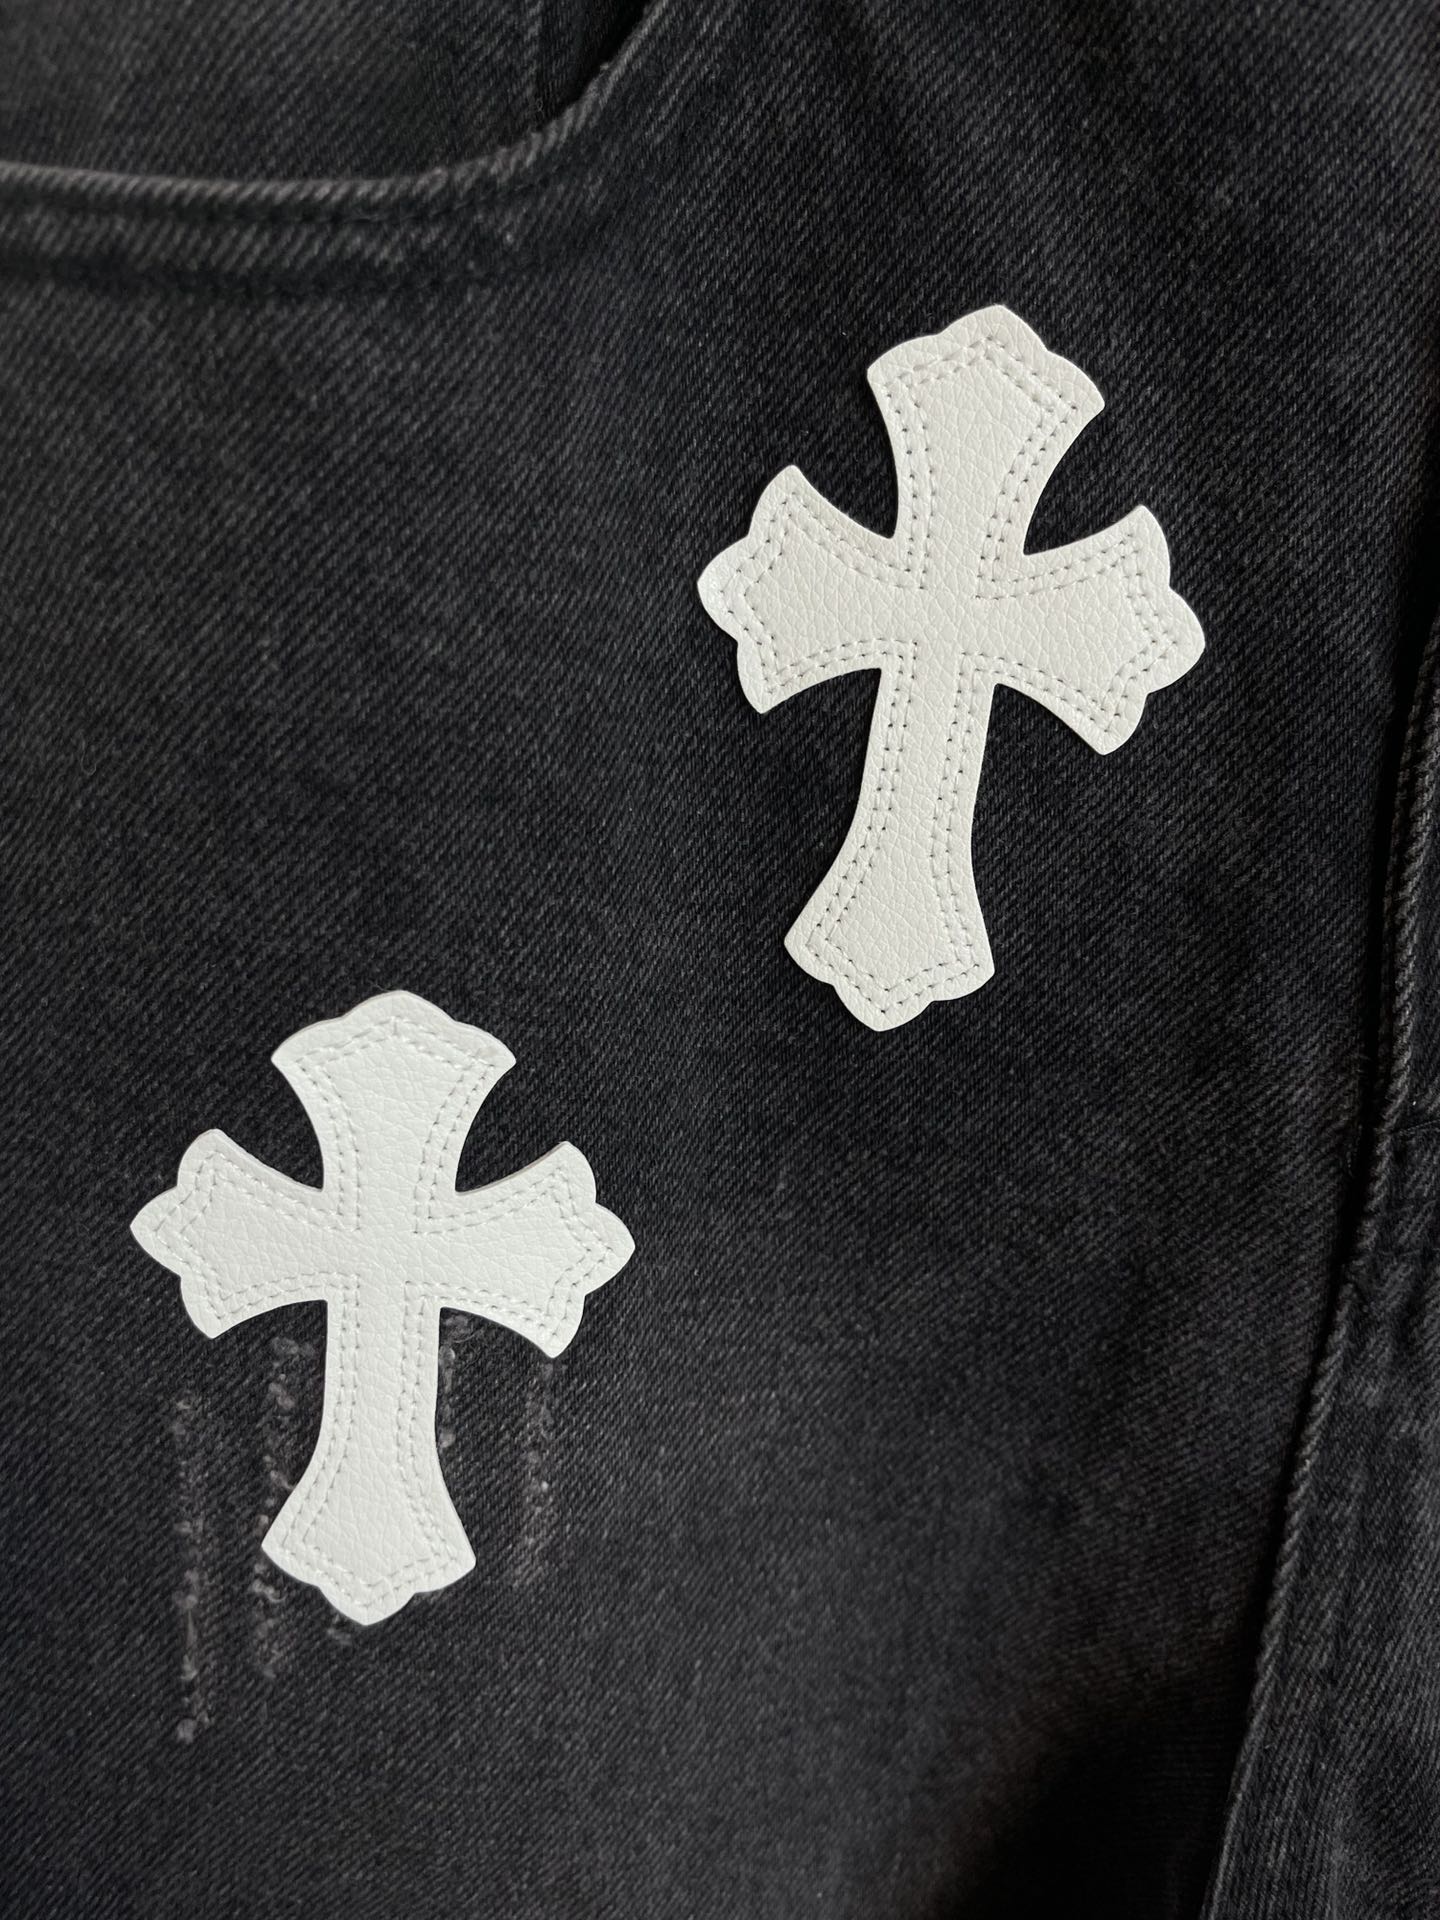 Replica Chrome Heart Cross Stitched Lather Jeans || Shop Now || Chrome Hearts